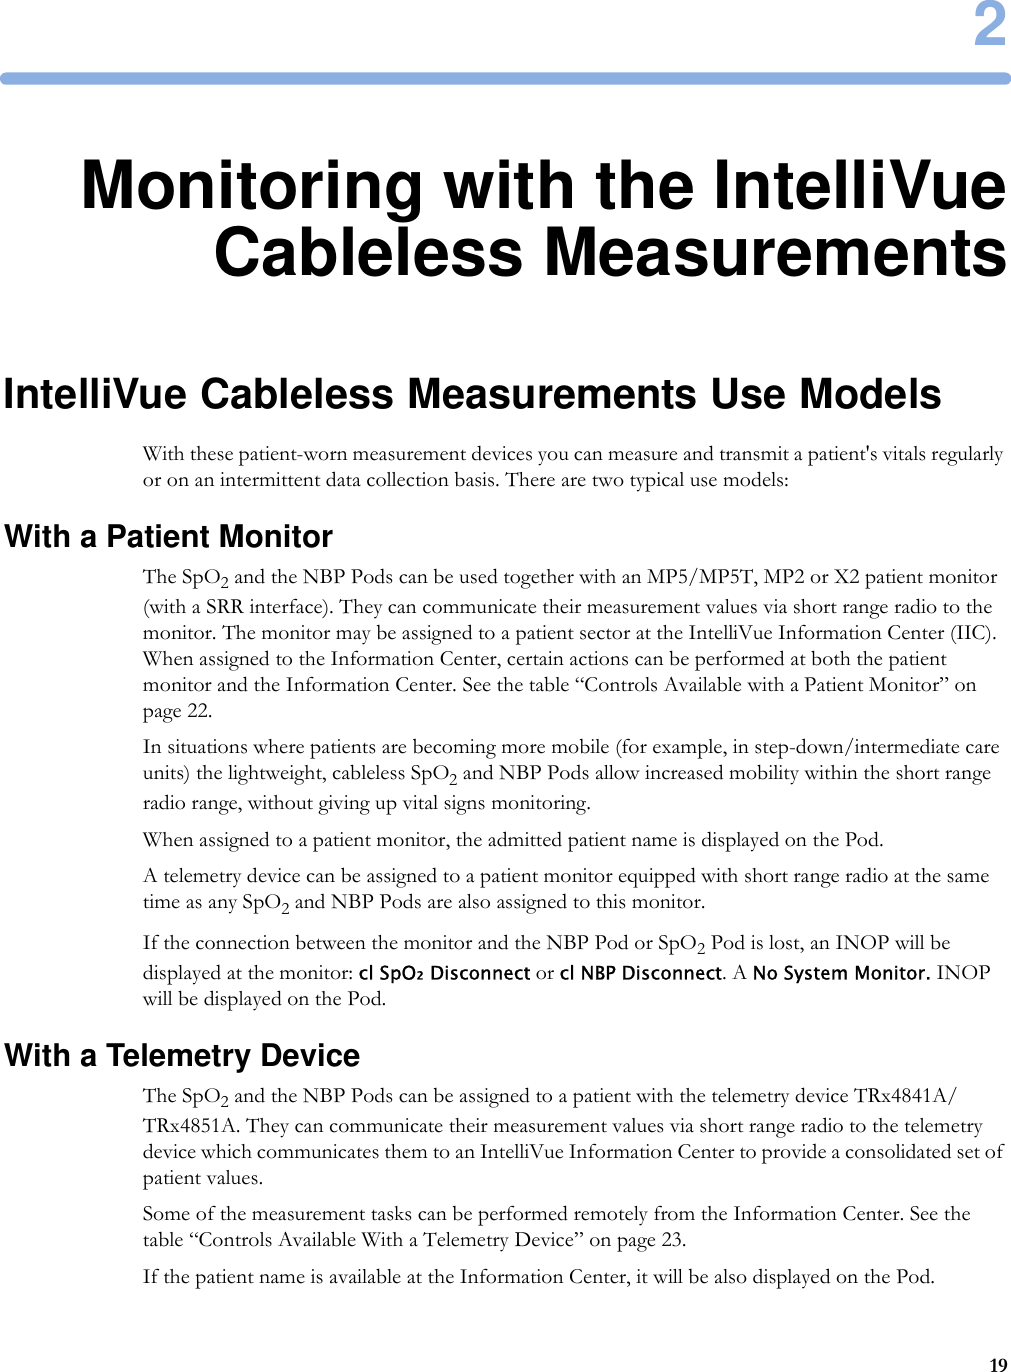 2192Monitoring with the IntelliVueCableless MeasurementsIntelliVue Cableless Measurements Use ModelsWith these patient-worn measurement devices you can measure and transmit a patient&apos;s vitals regularly or on an intermittent data collection basis. There are two typical use models:With a Patient MonitorThe SpO2 and the NBP Pods can be used together with an MP5/MP5T, MP2 or X2 patient monitor (with a SRR interface). They can communicate their measurement values via short range radio to the monitor. The monitor may be assigned to a patient sector at the IntelliVue Information Center (IIC). When assigned to the Information Center, certain actions can be performed at both the patient monitor and the Information Center. See the table “Controls Available with a Patient Monitor” on page 22.In situations where patients are becoming more mobile (for example, in step-down/intermediate care units) the lightweight, cableless SpO2 and NBP Pods allow increased mobility within the short range radio range, without giving up vital signs monitoring.When assigned to a patient monitor, the admitted patient name is displayed on the Pod.A telemetry device can be assigned to a patient monitor equipped with short range radio at the same time as any SpO2 and NBP Pods are also assigned to this monitor.If the connection between the monitor and the NBP Pod or SpO2 Pod is lost, an INOP will be displayed at the monitor: cl SpO₂ Disconnect or cl NBP Disconnect. A No System Monitor. INOP will be displayed on the Pod.With a Telemetry DeviceThe SpO2 and the NBP Pods can be assigned to a patient with the telemetry device TRx4841A/TRx4851A. They can communicate their measurement values via short range radio to the telemetry device which communicates them to an IntelliVue Information Center to provide a consolidated set of patient values.Some of the measurement tasks can be performed remotely from the Information Center. See the table “Controls Available With a Telemetry Device” on page 23.If the patient name is available at the Information Center, it will be also displayed on the Pod.